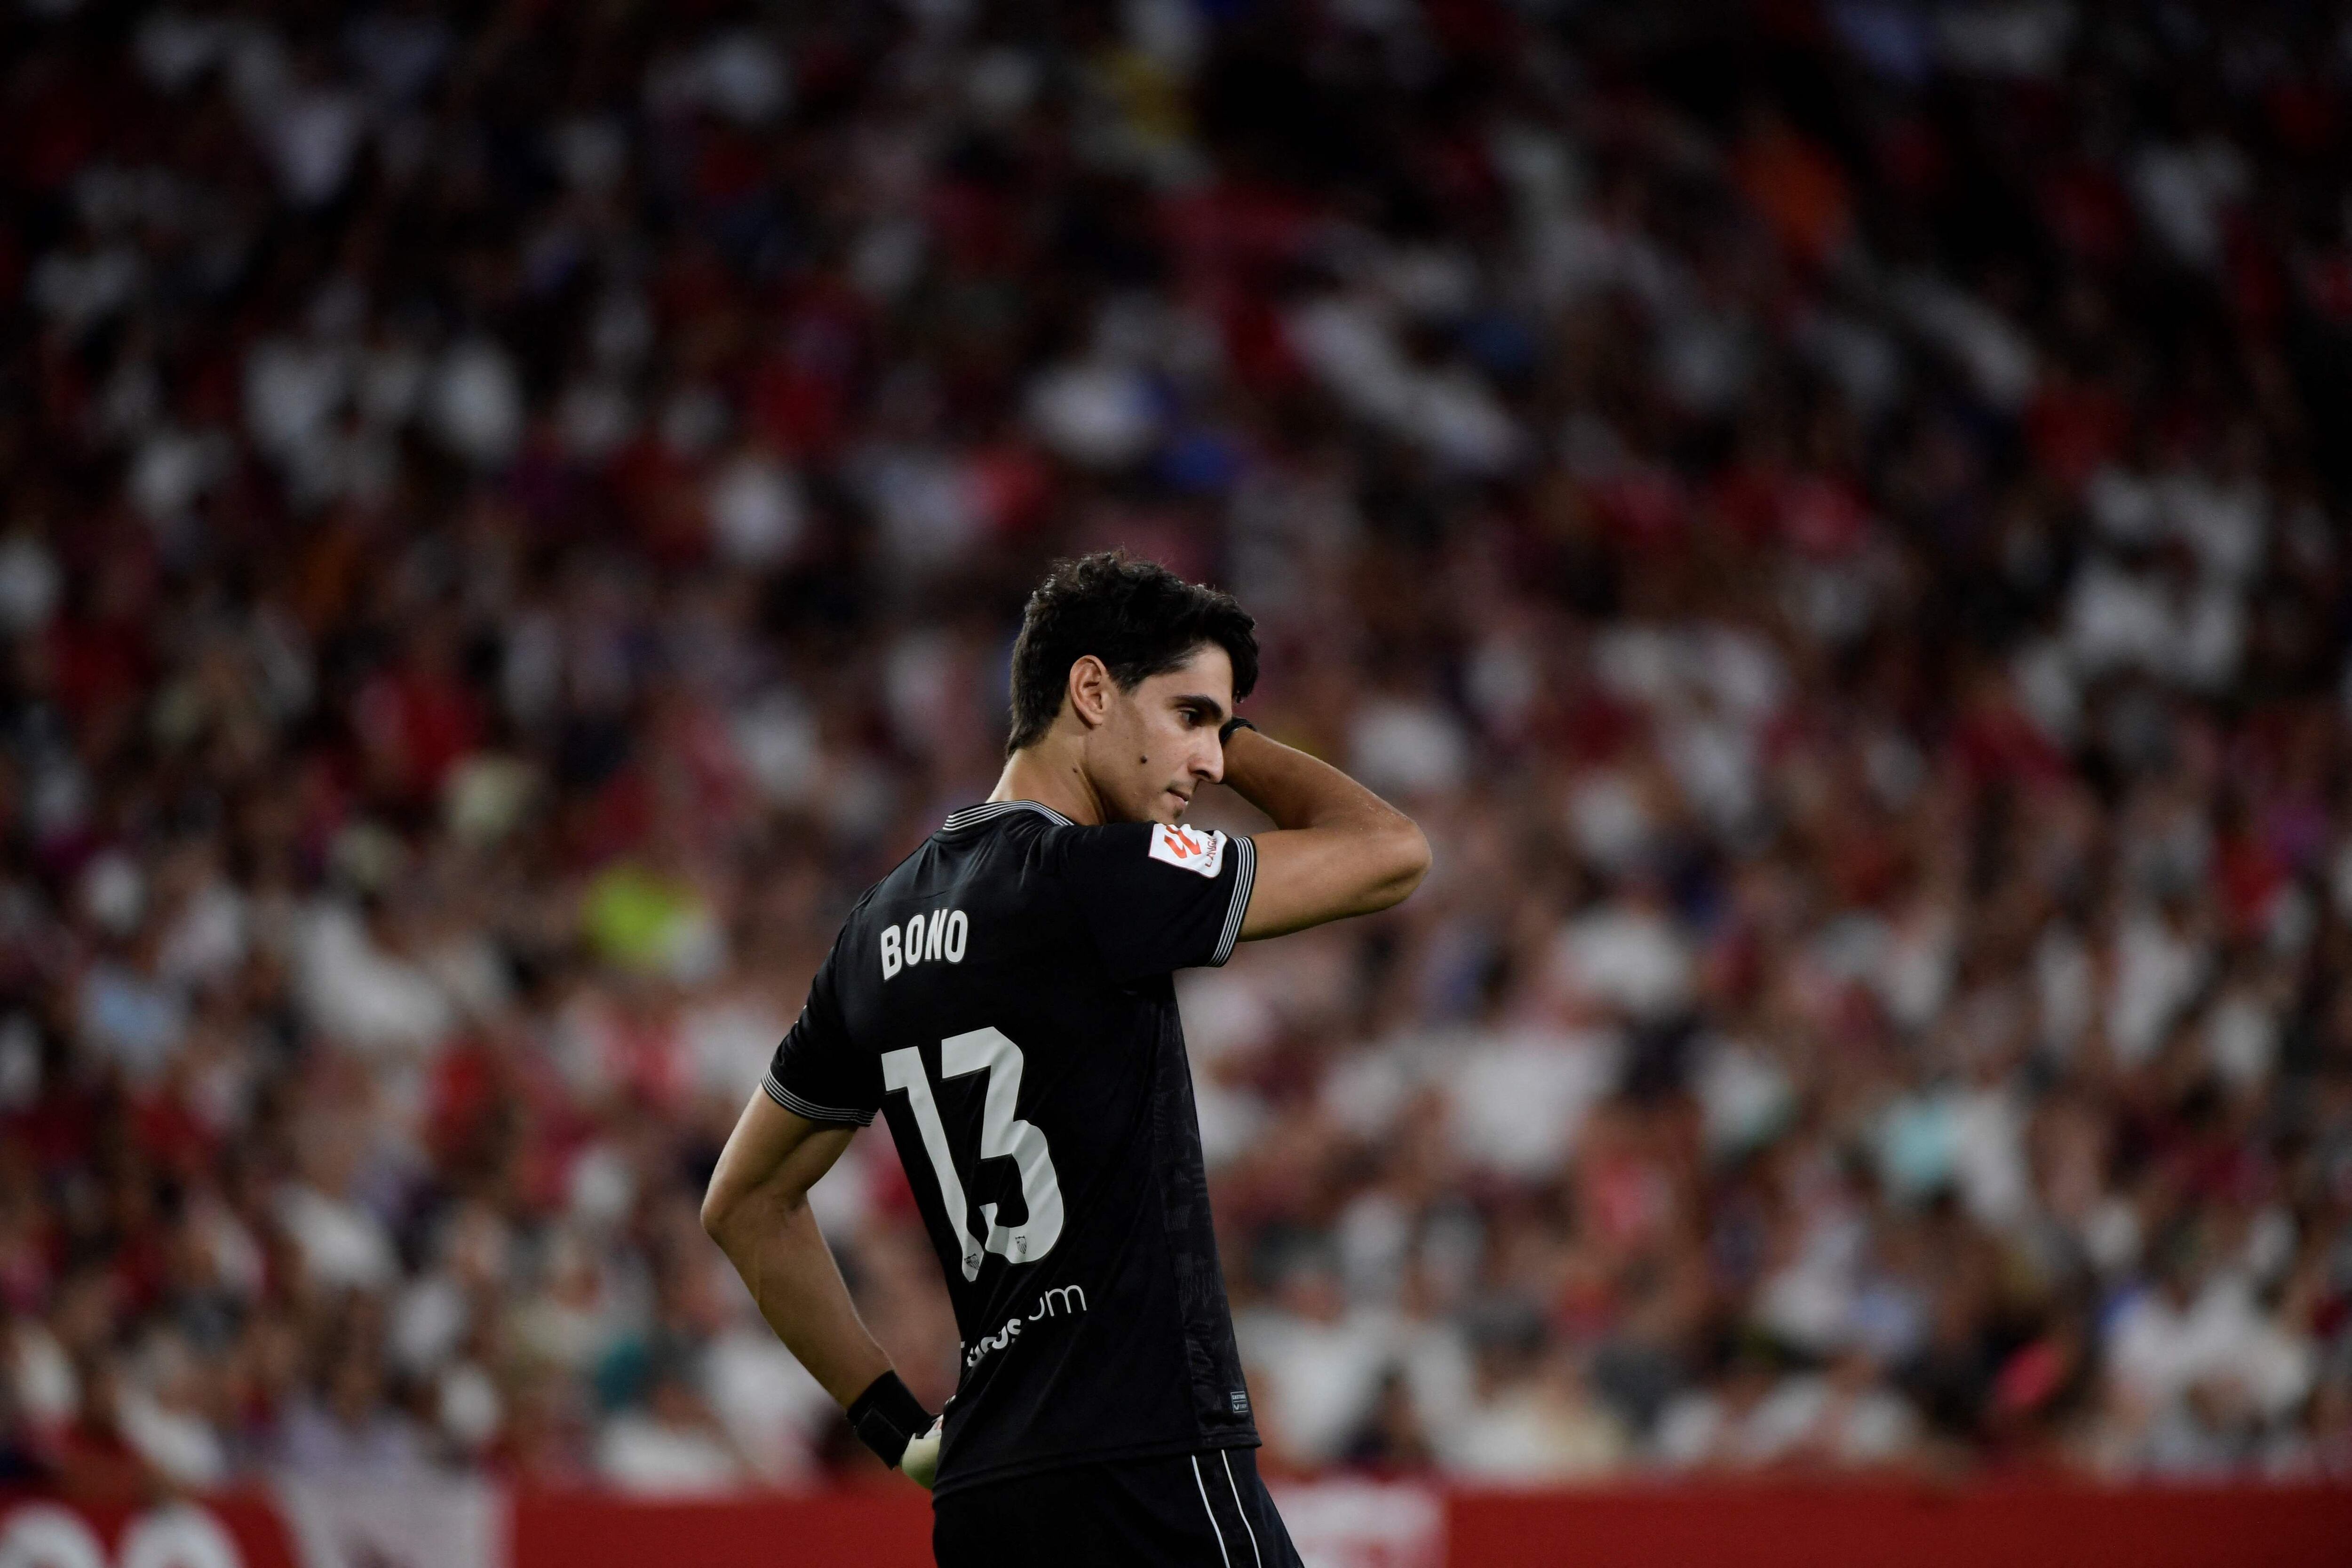 Sevilla's Moroccan goalkeeper #13 Yassine Bounou "Bono" reacts during the Spanish Liga football match between Sevilla FC and Valencia CF at the Ramon Sanchez Pizjuan stadium in Seville on August 11, 2023. (Photo by CRISTINA QUICLER / AFP)